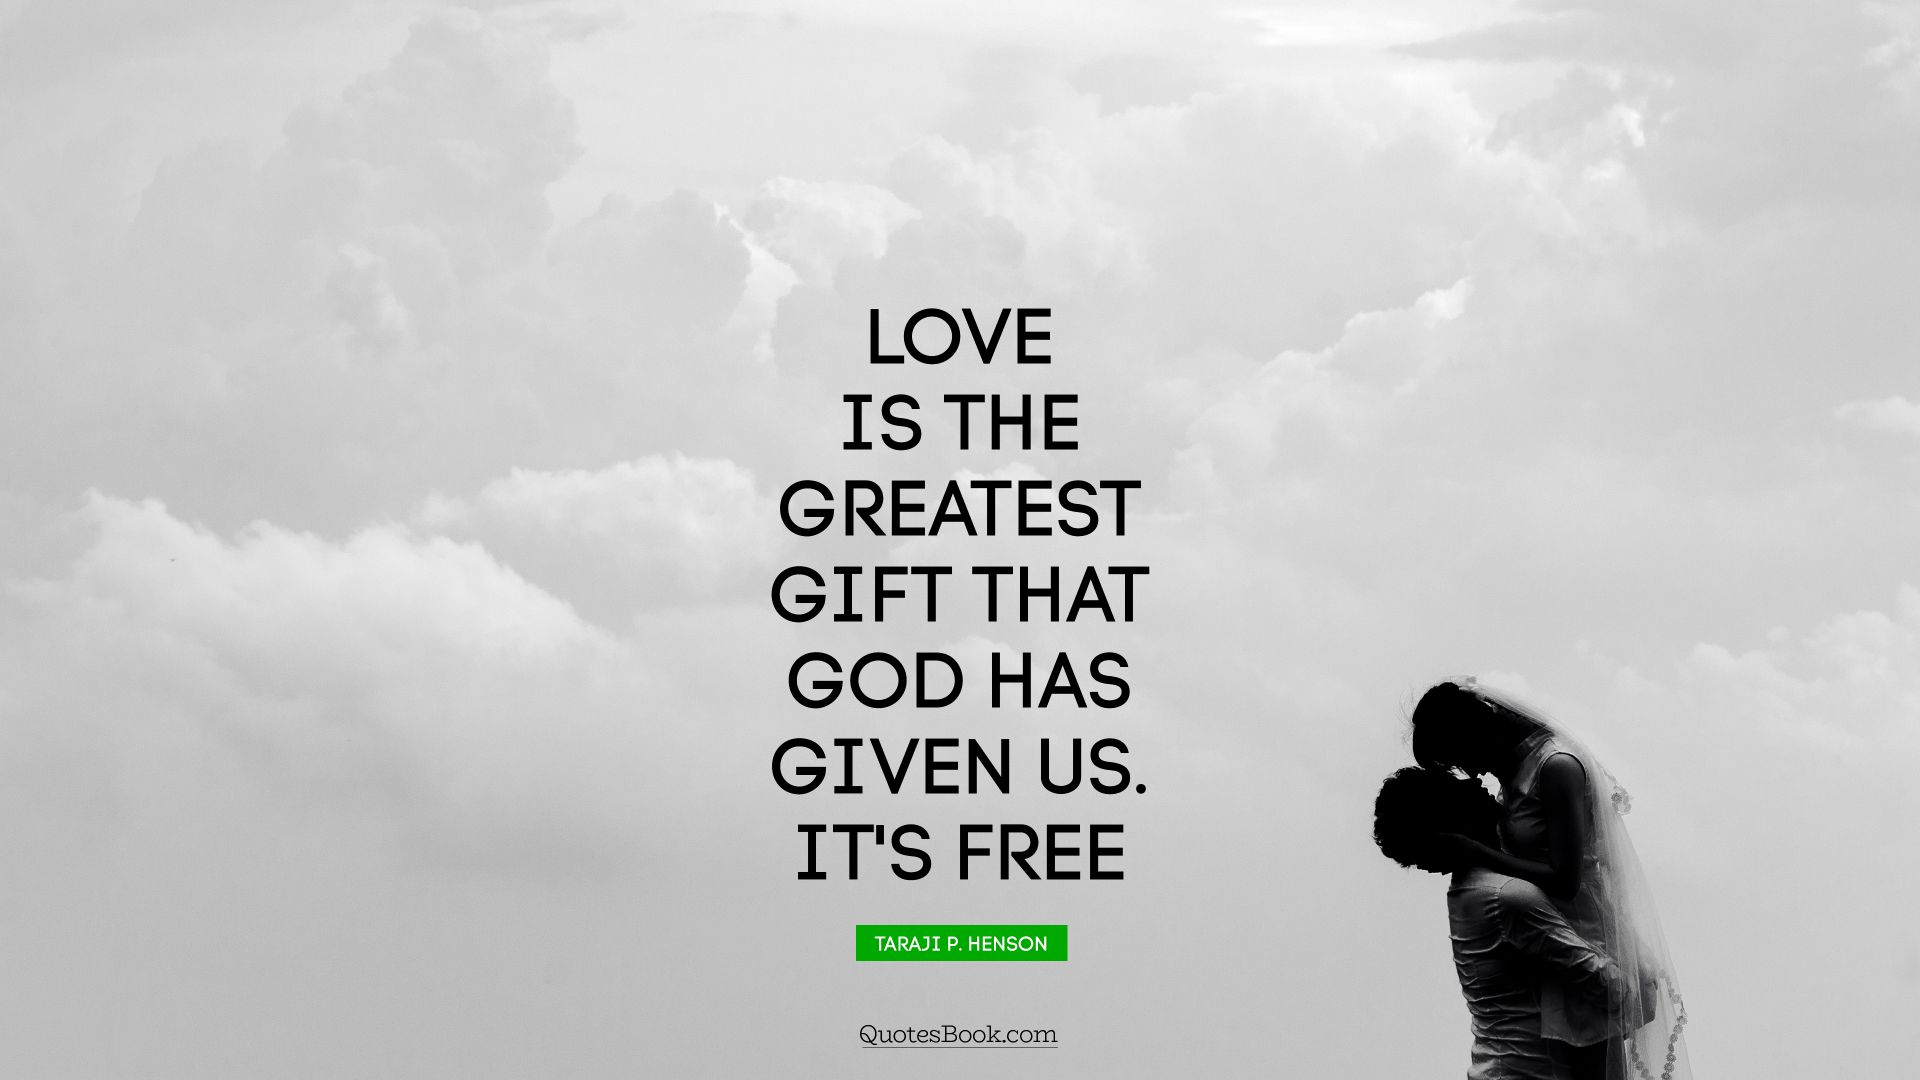 Love is the greatest gift that God has given us. It's free. - Quote by Taraji P. Henson